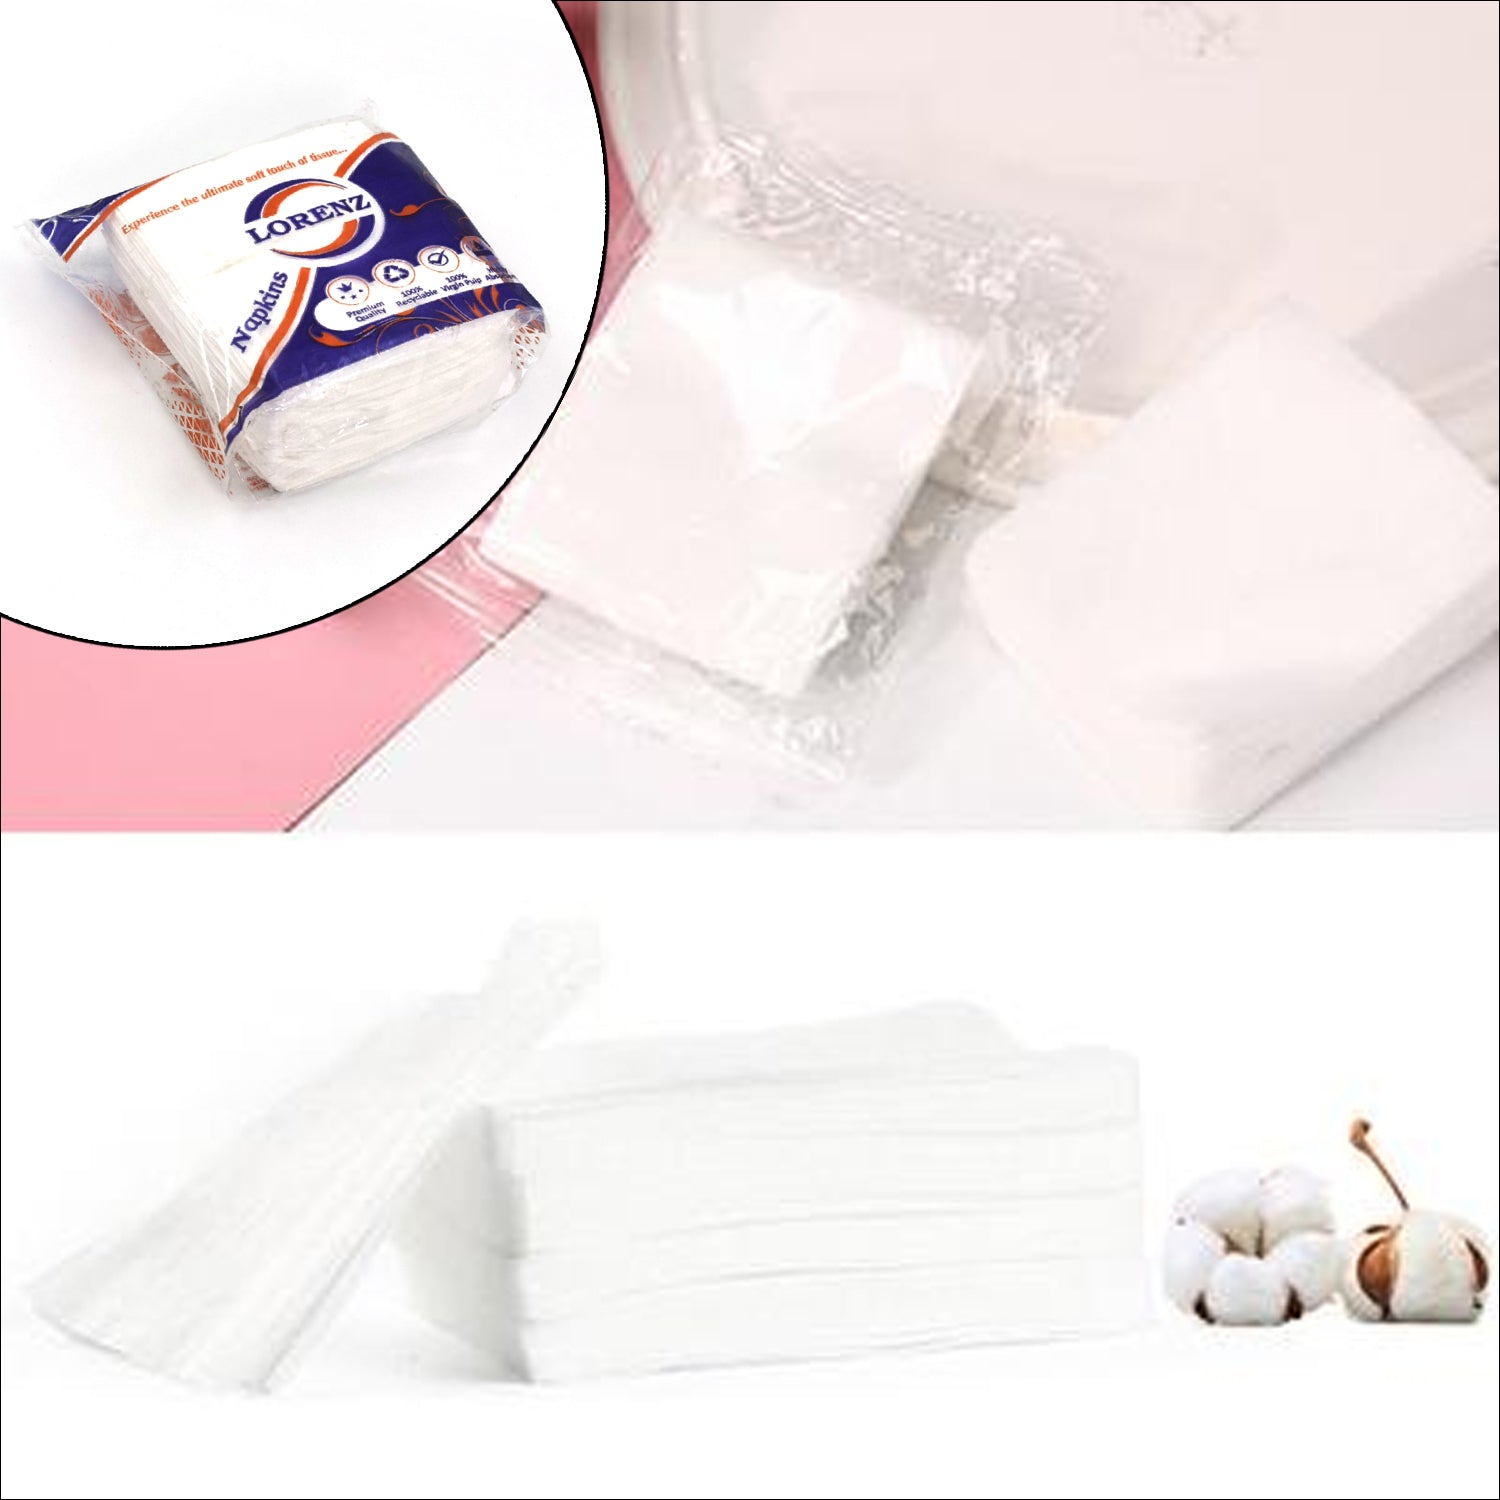 6185 Tissue Paper For Wiping And Cleaning Purposes Of Types Of Things. DeoDap